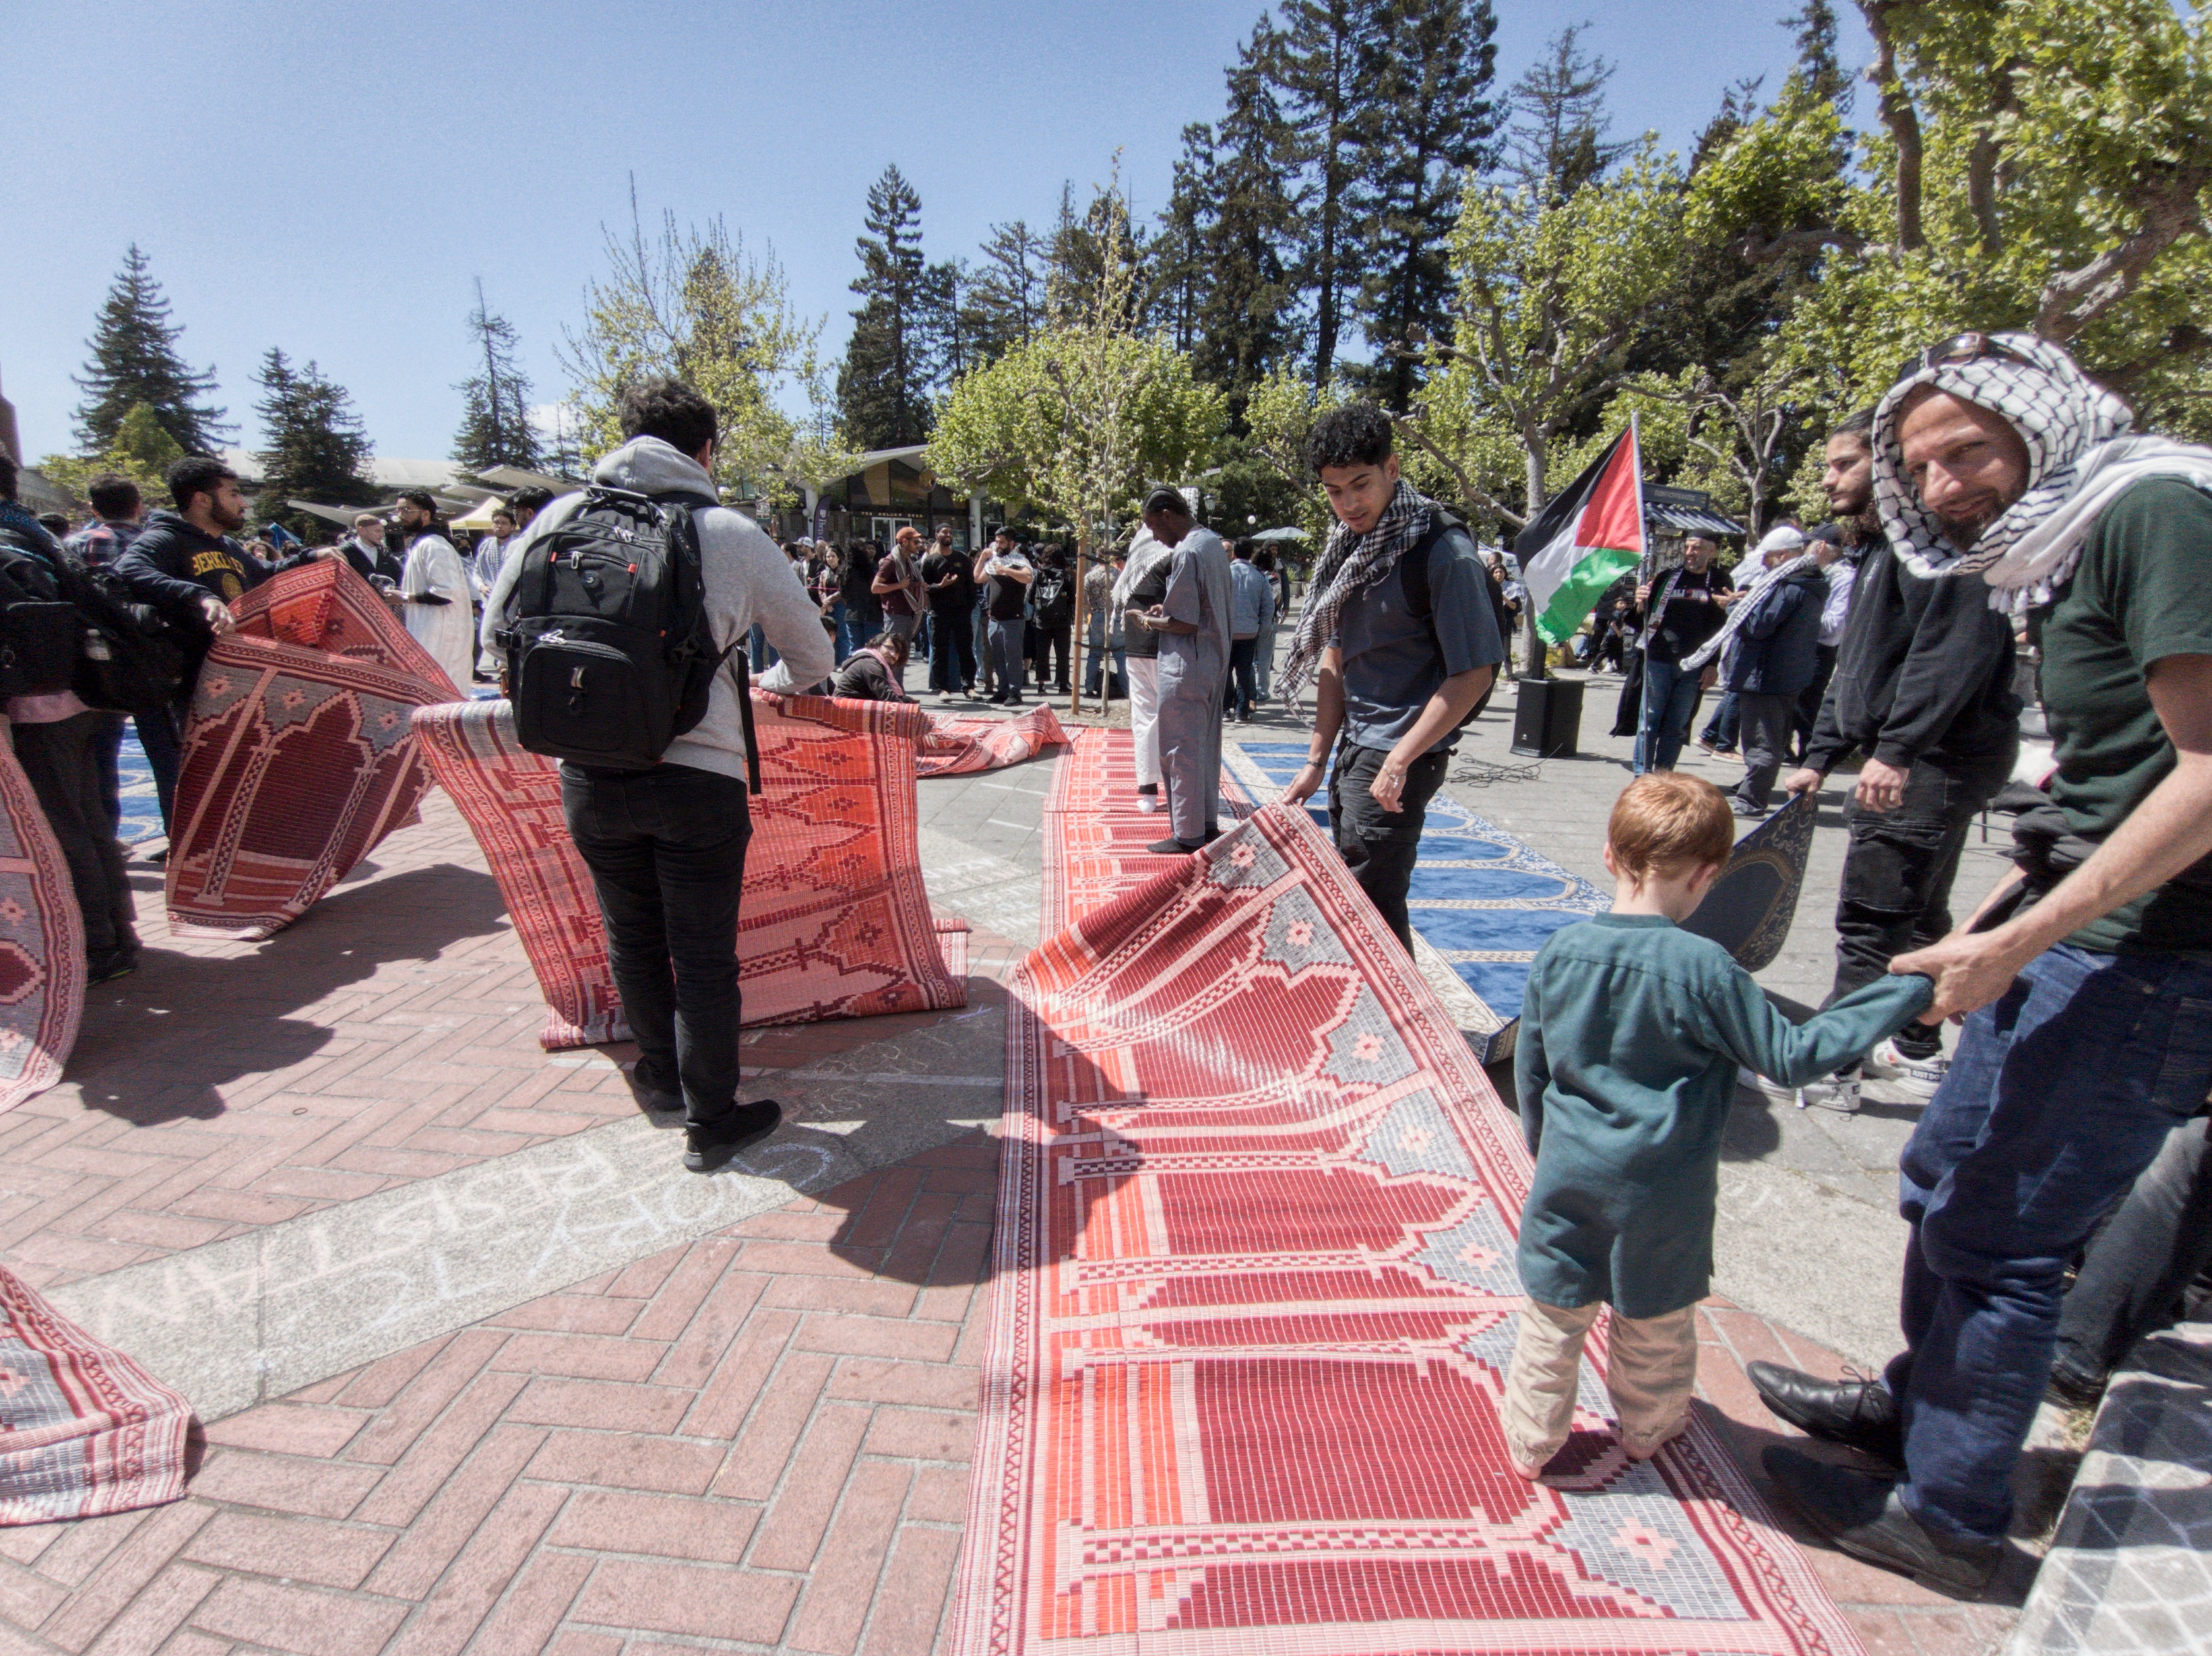 A child interacts with adults holding up a red patterned barrier at an outdoor gathering beneath trees.